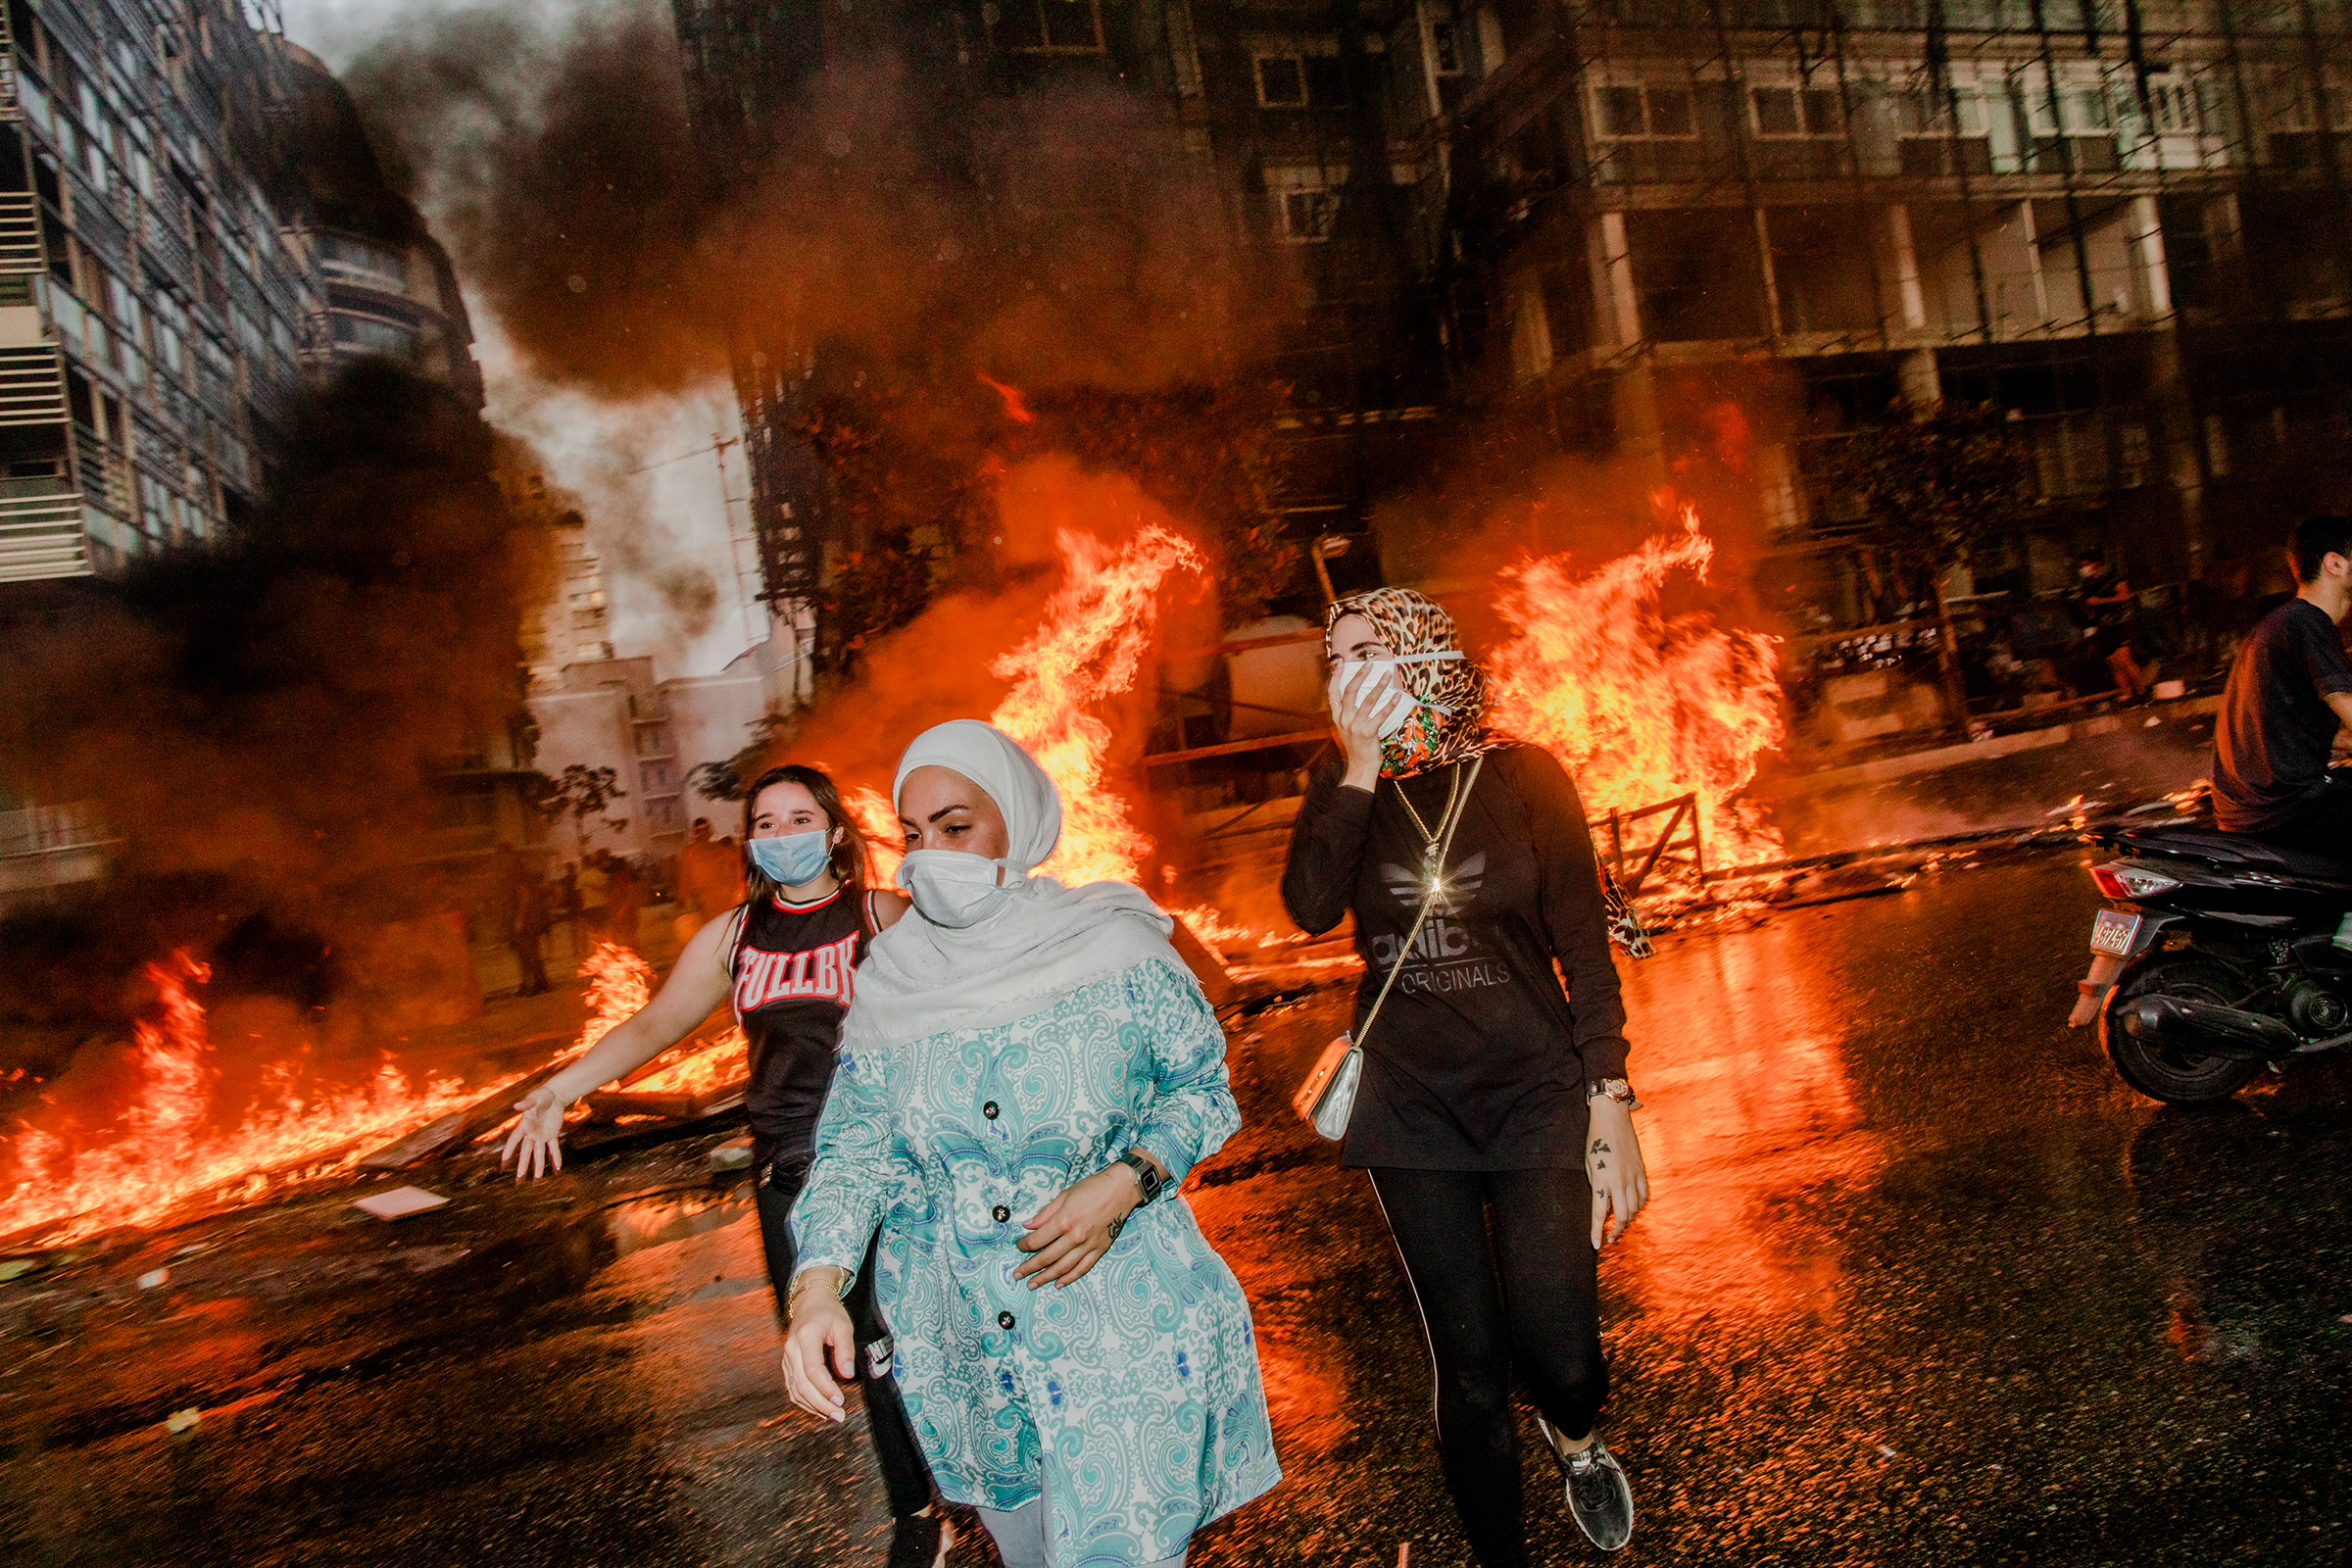 Nour, Nour and Farah attend a mass protest in Beirut on Oct. 18, 2019. (Myriam Boulos)